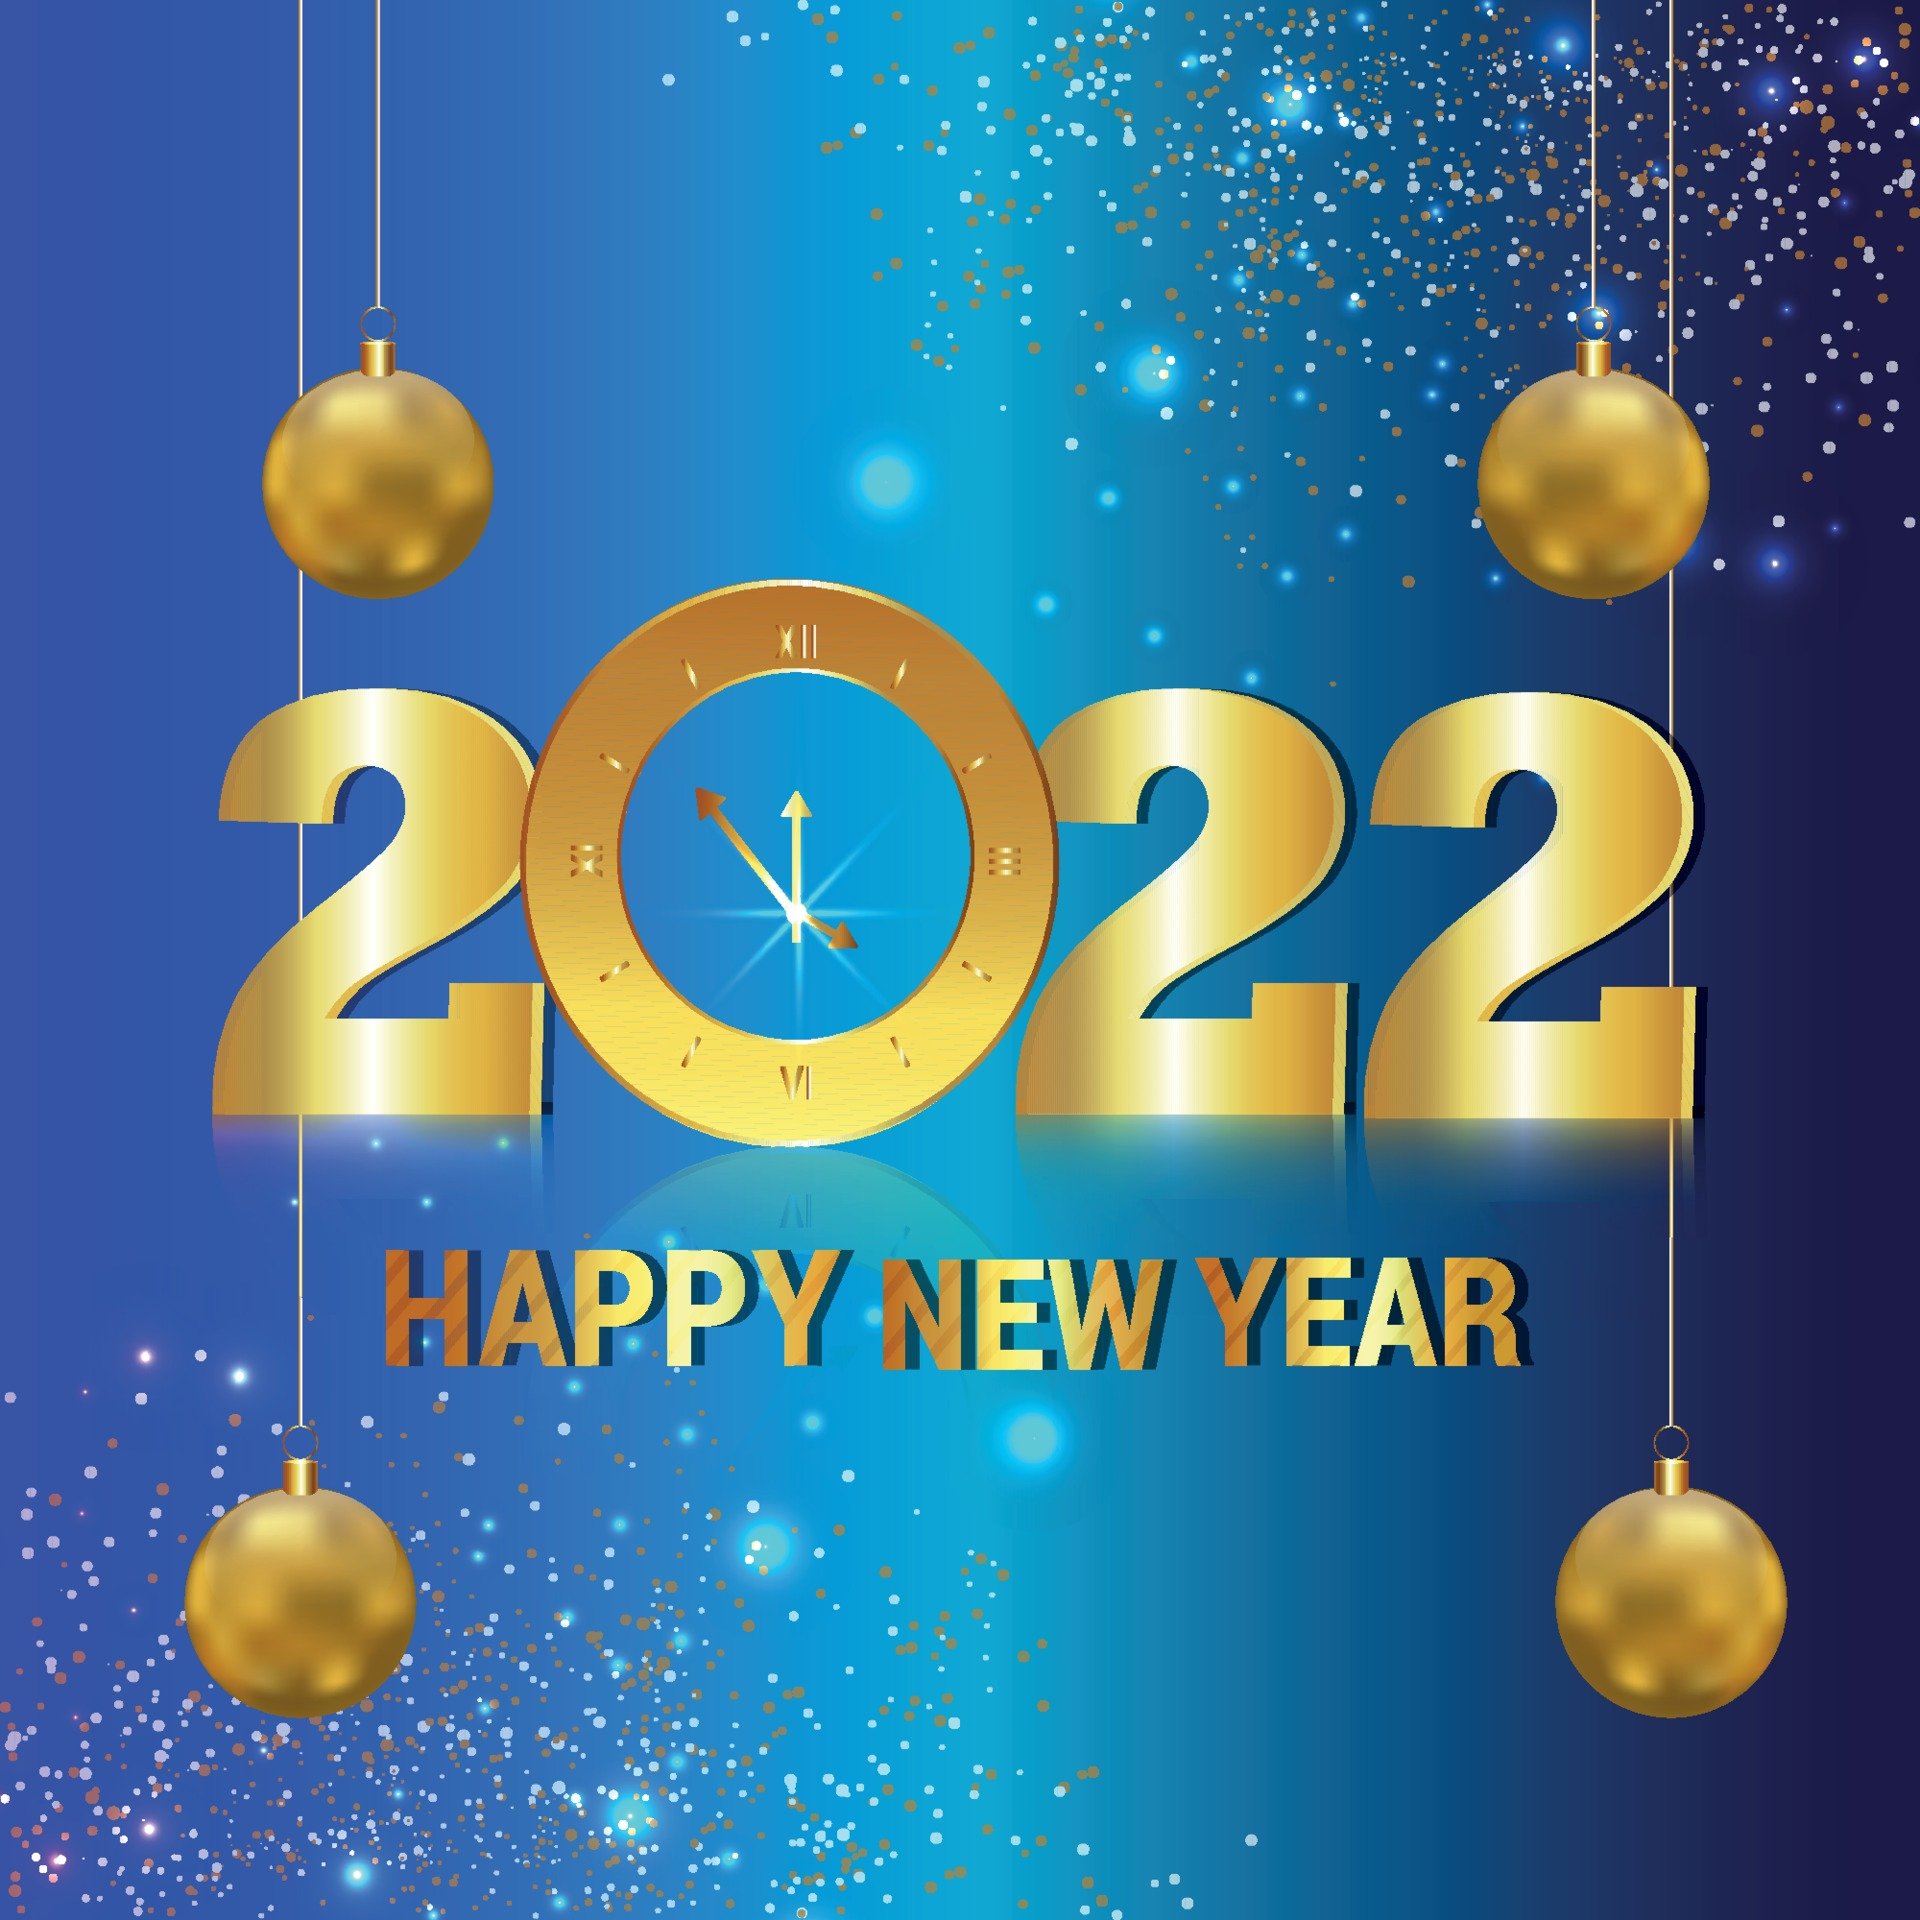 Happy New Year 2022 Background Images and Wallpapers – YL Computing